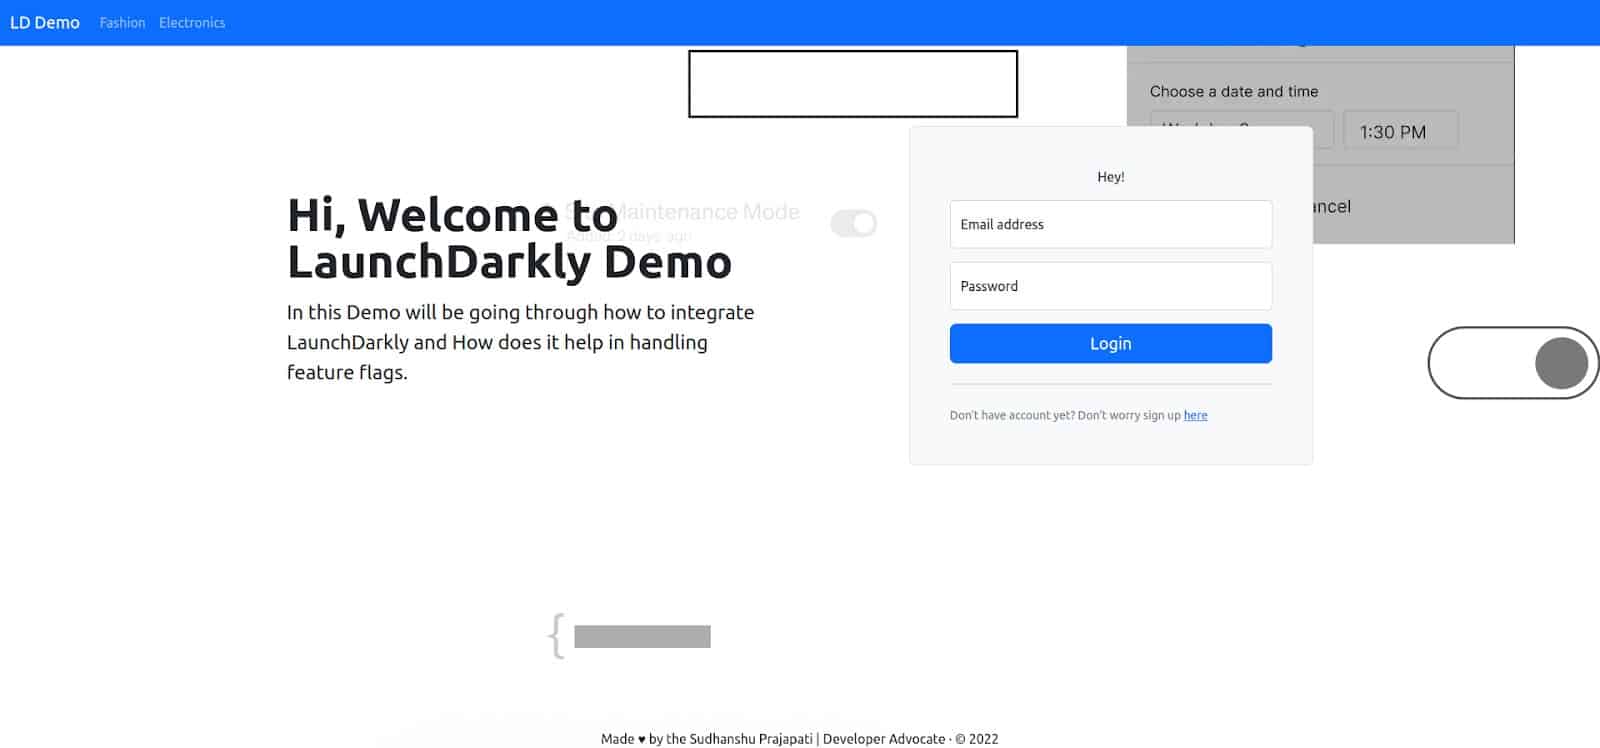 Screenshot showing LD Demo welcome page